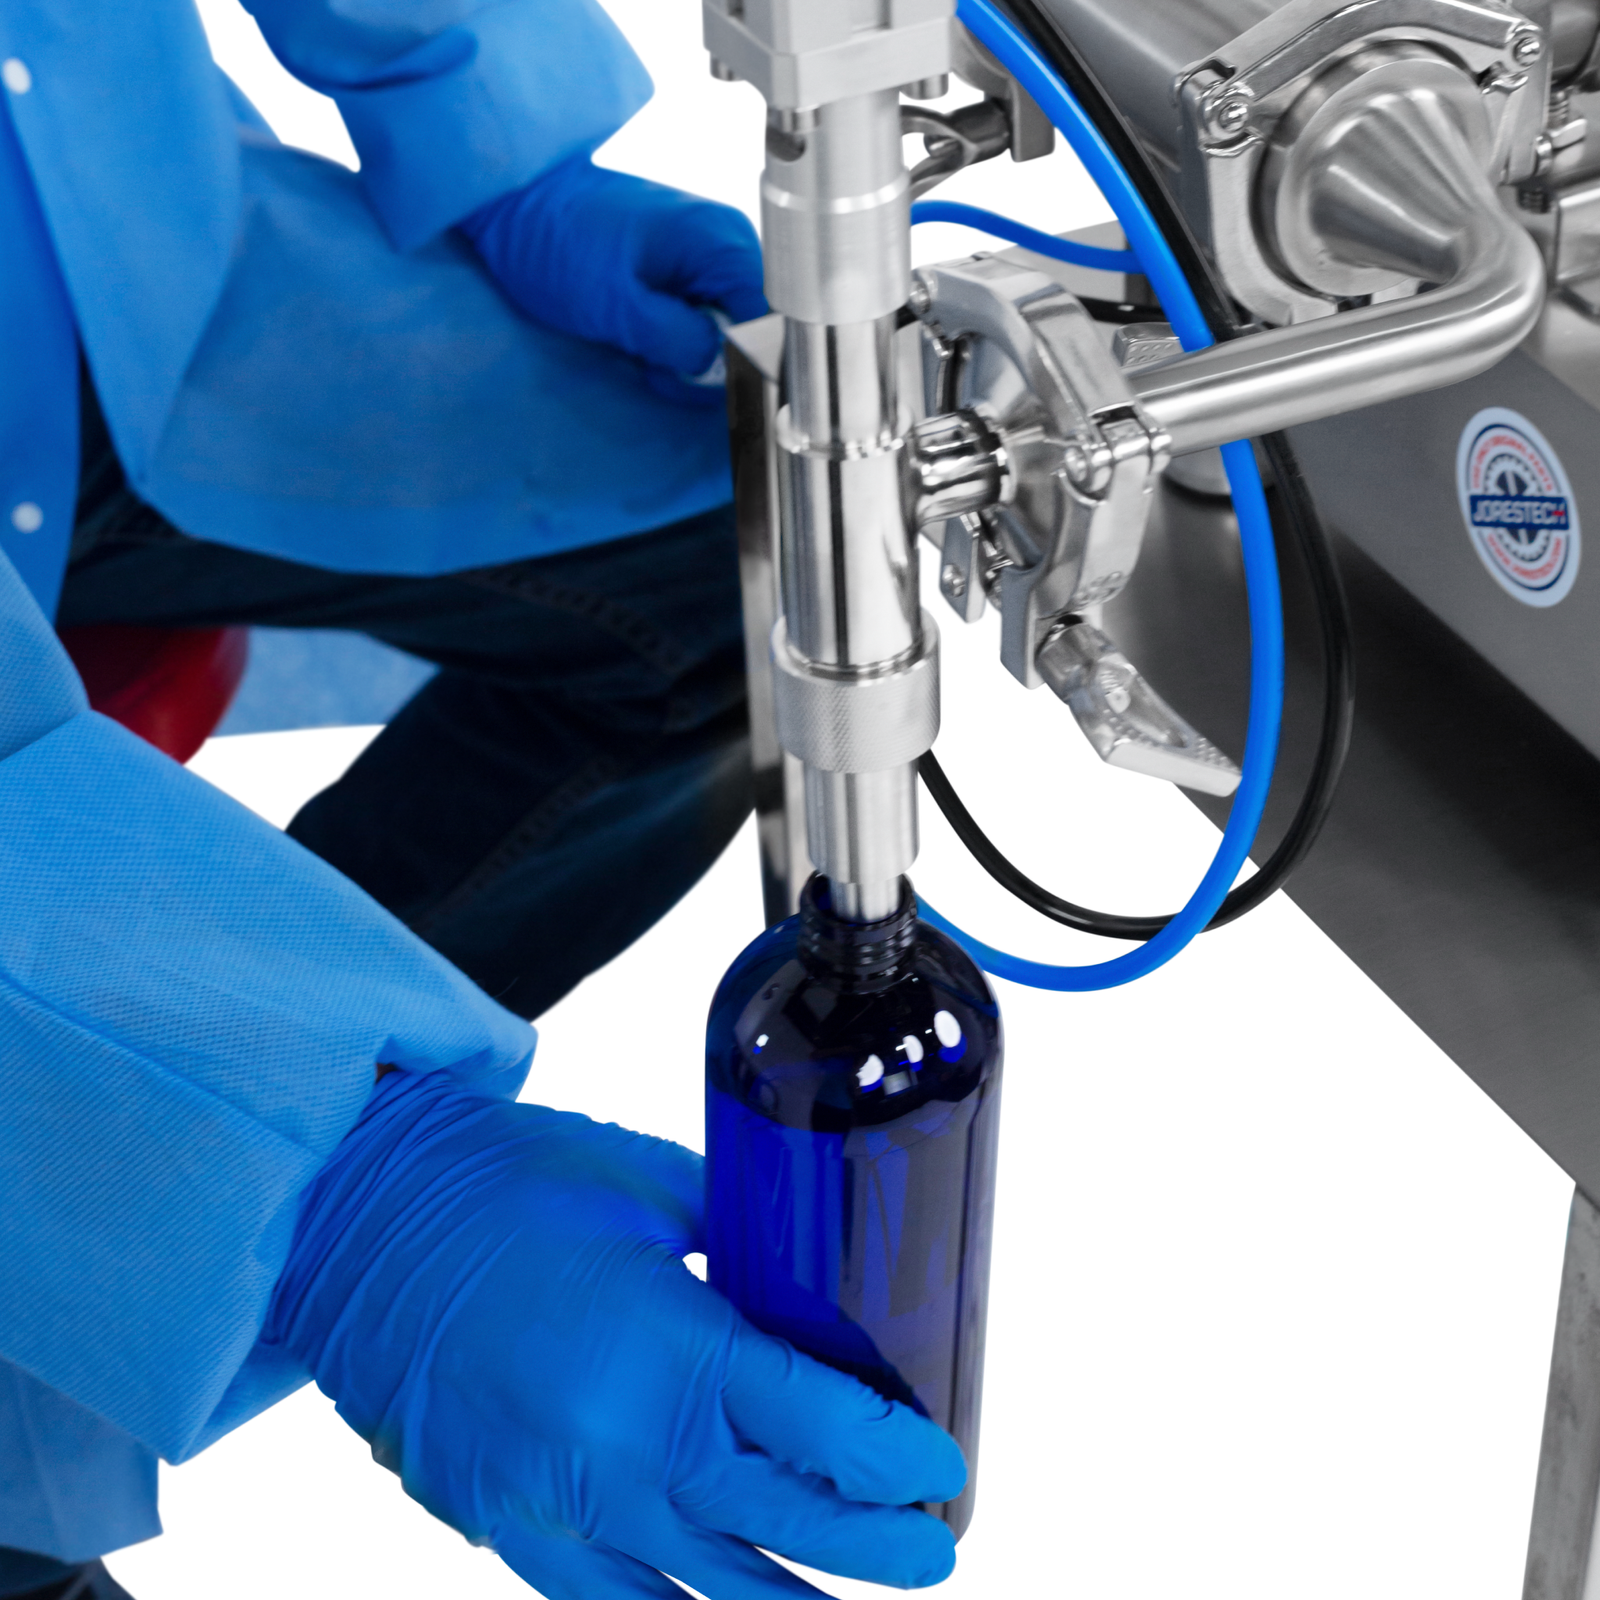 Hand of a worker wearing nitrile safety gloves operating the Jorestech Low Viscosity Piston Filler. The person is positioning a 500ml bottle below the tip of the non-drip nozzle to be filled with accuracy by the liquid filling machine